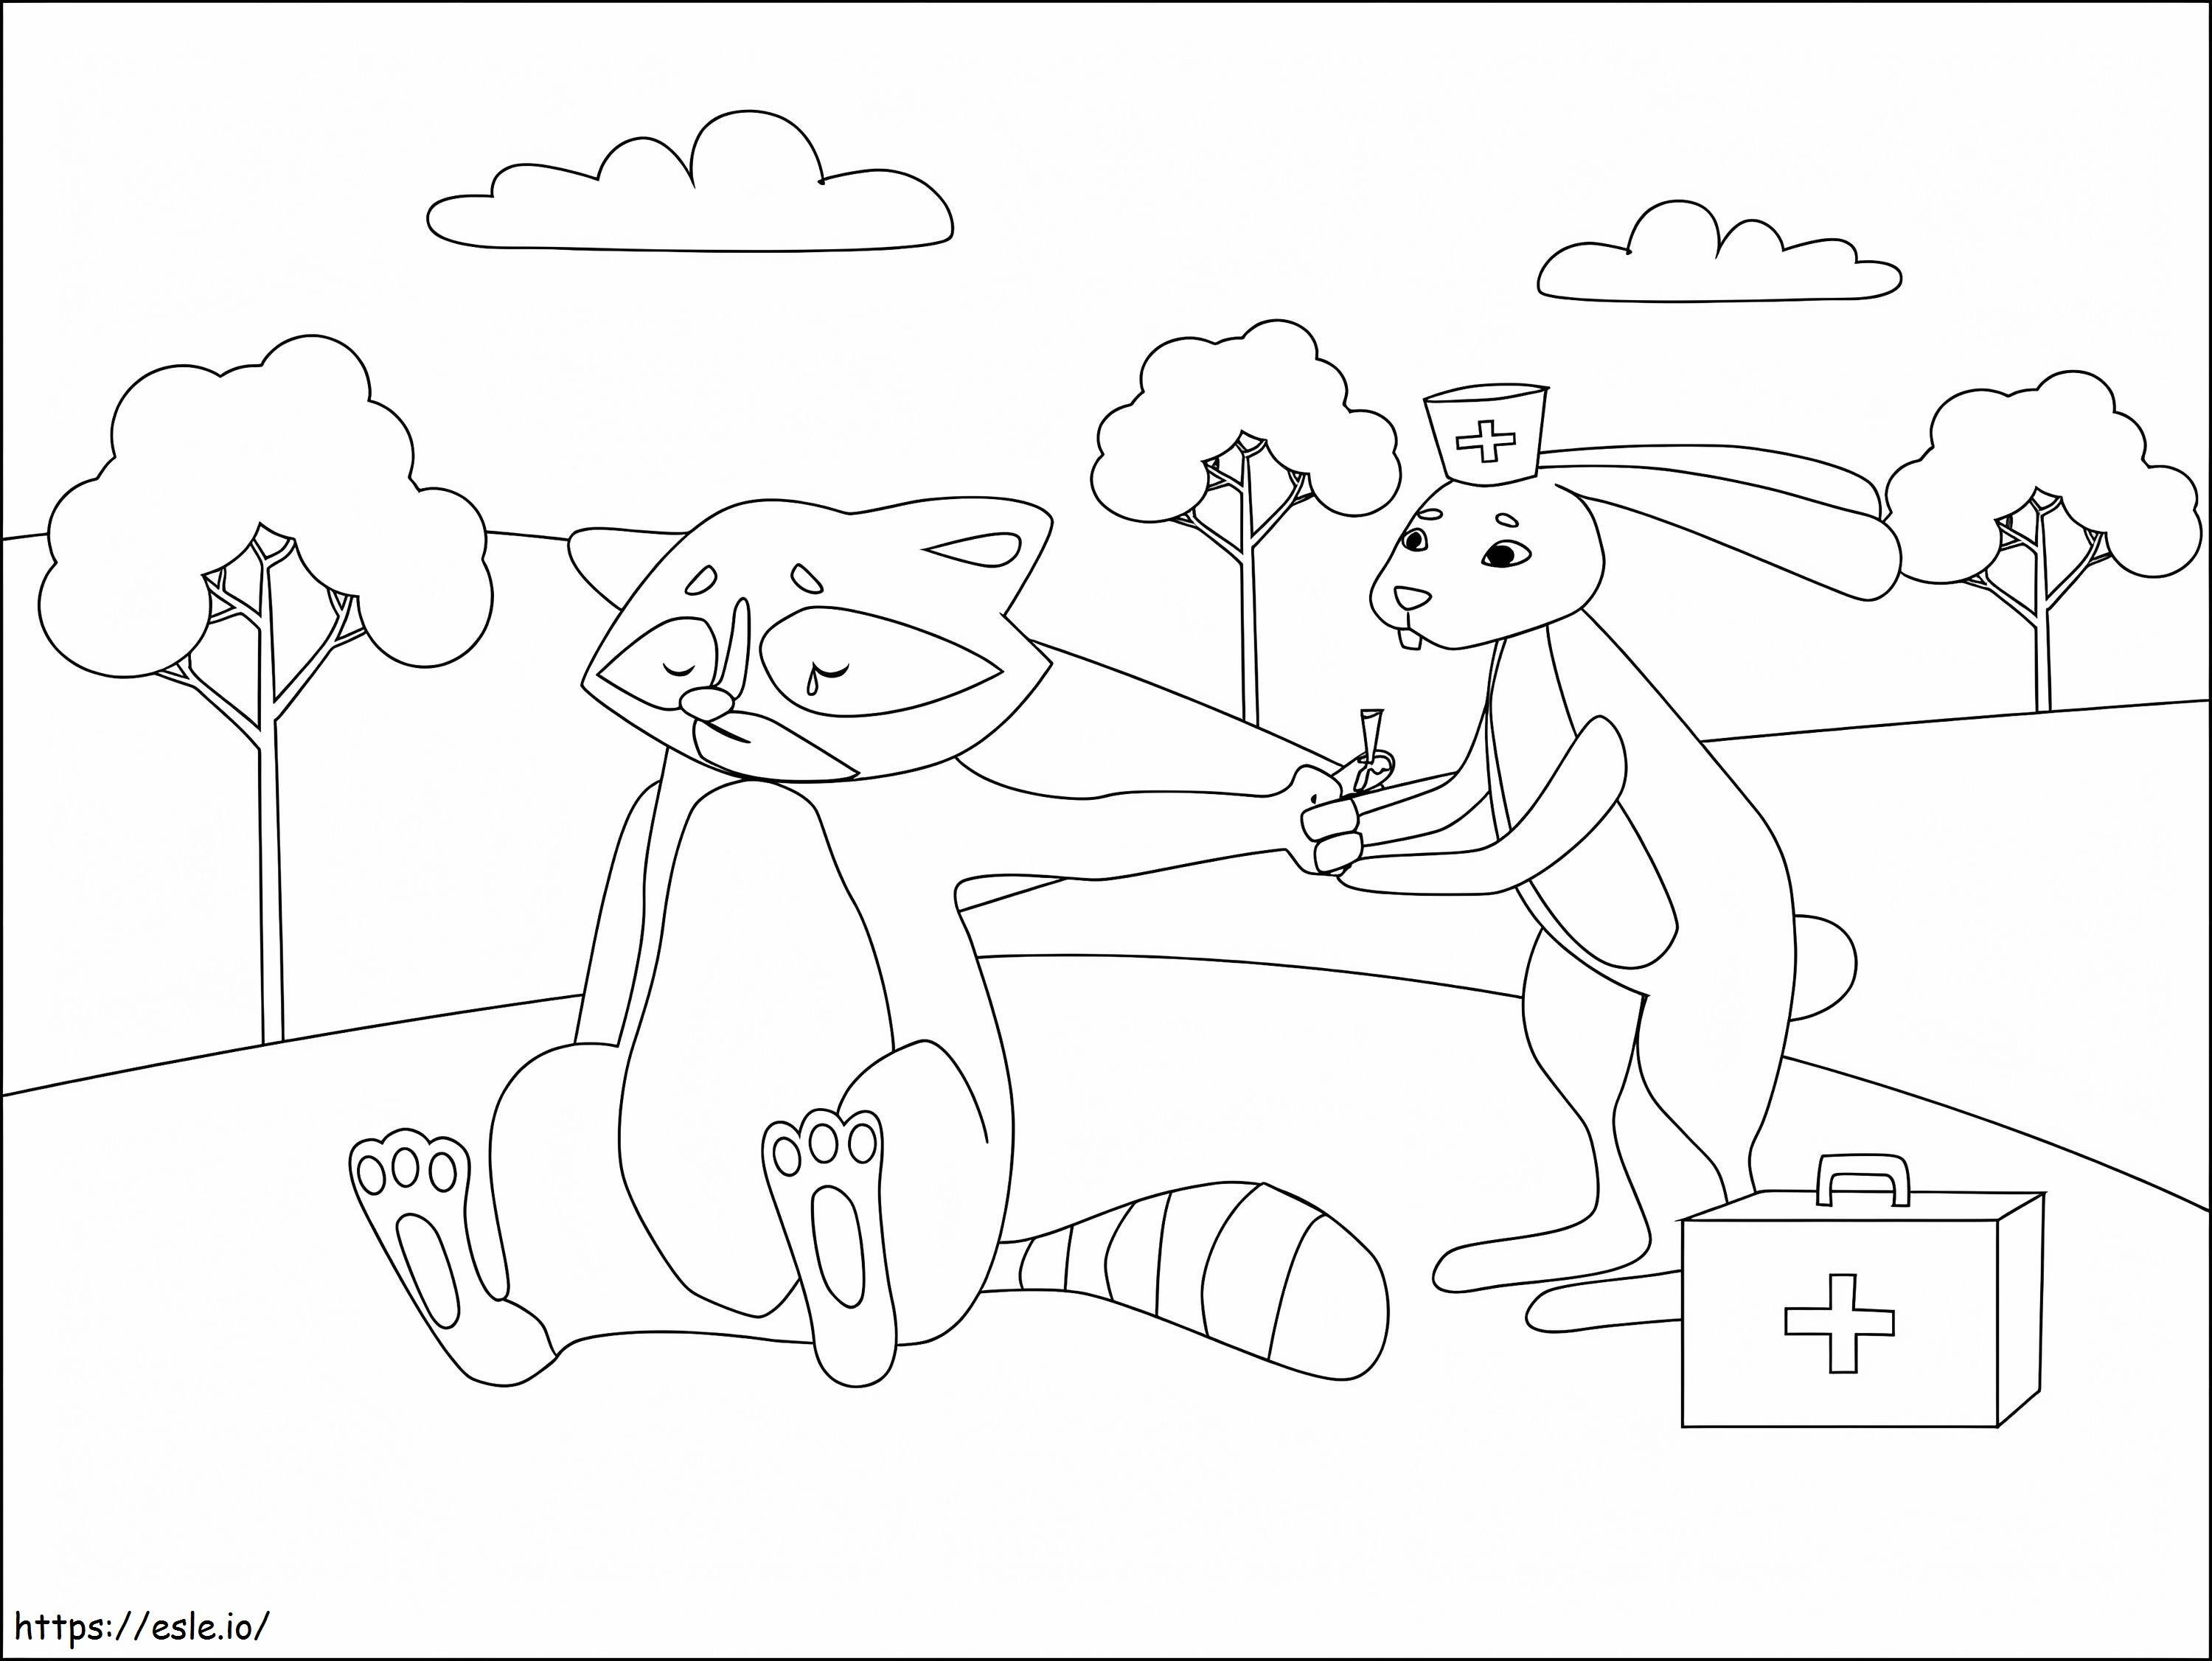 Doctor Rabbit coloring page